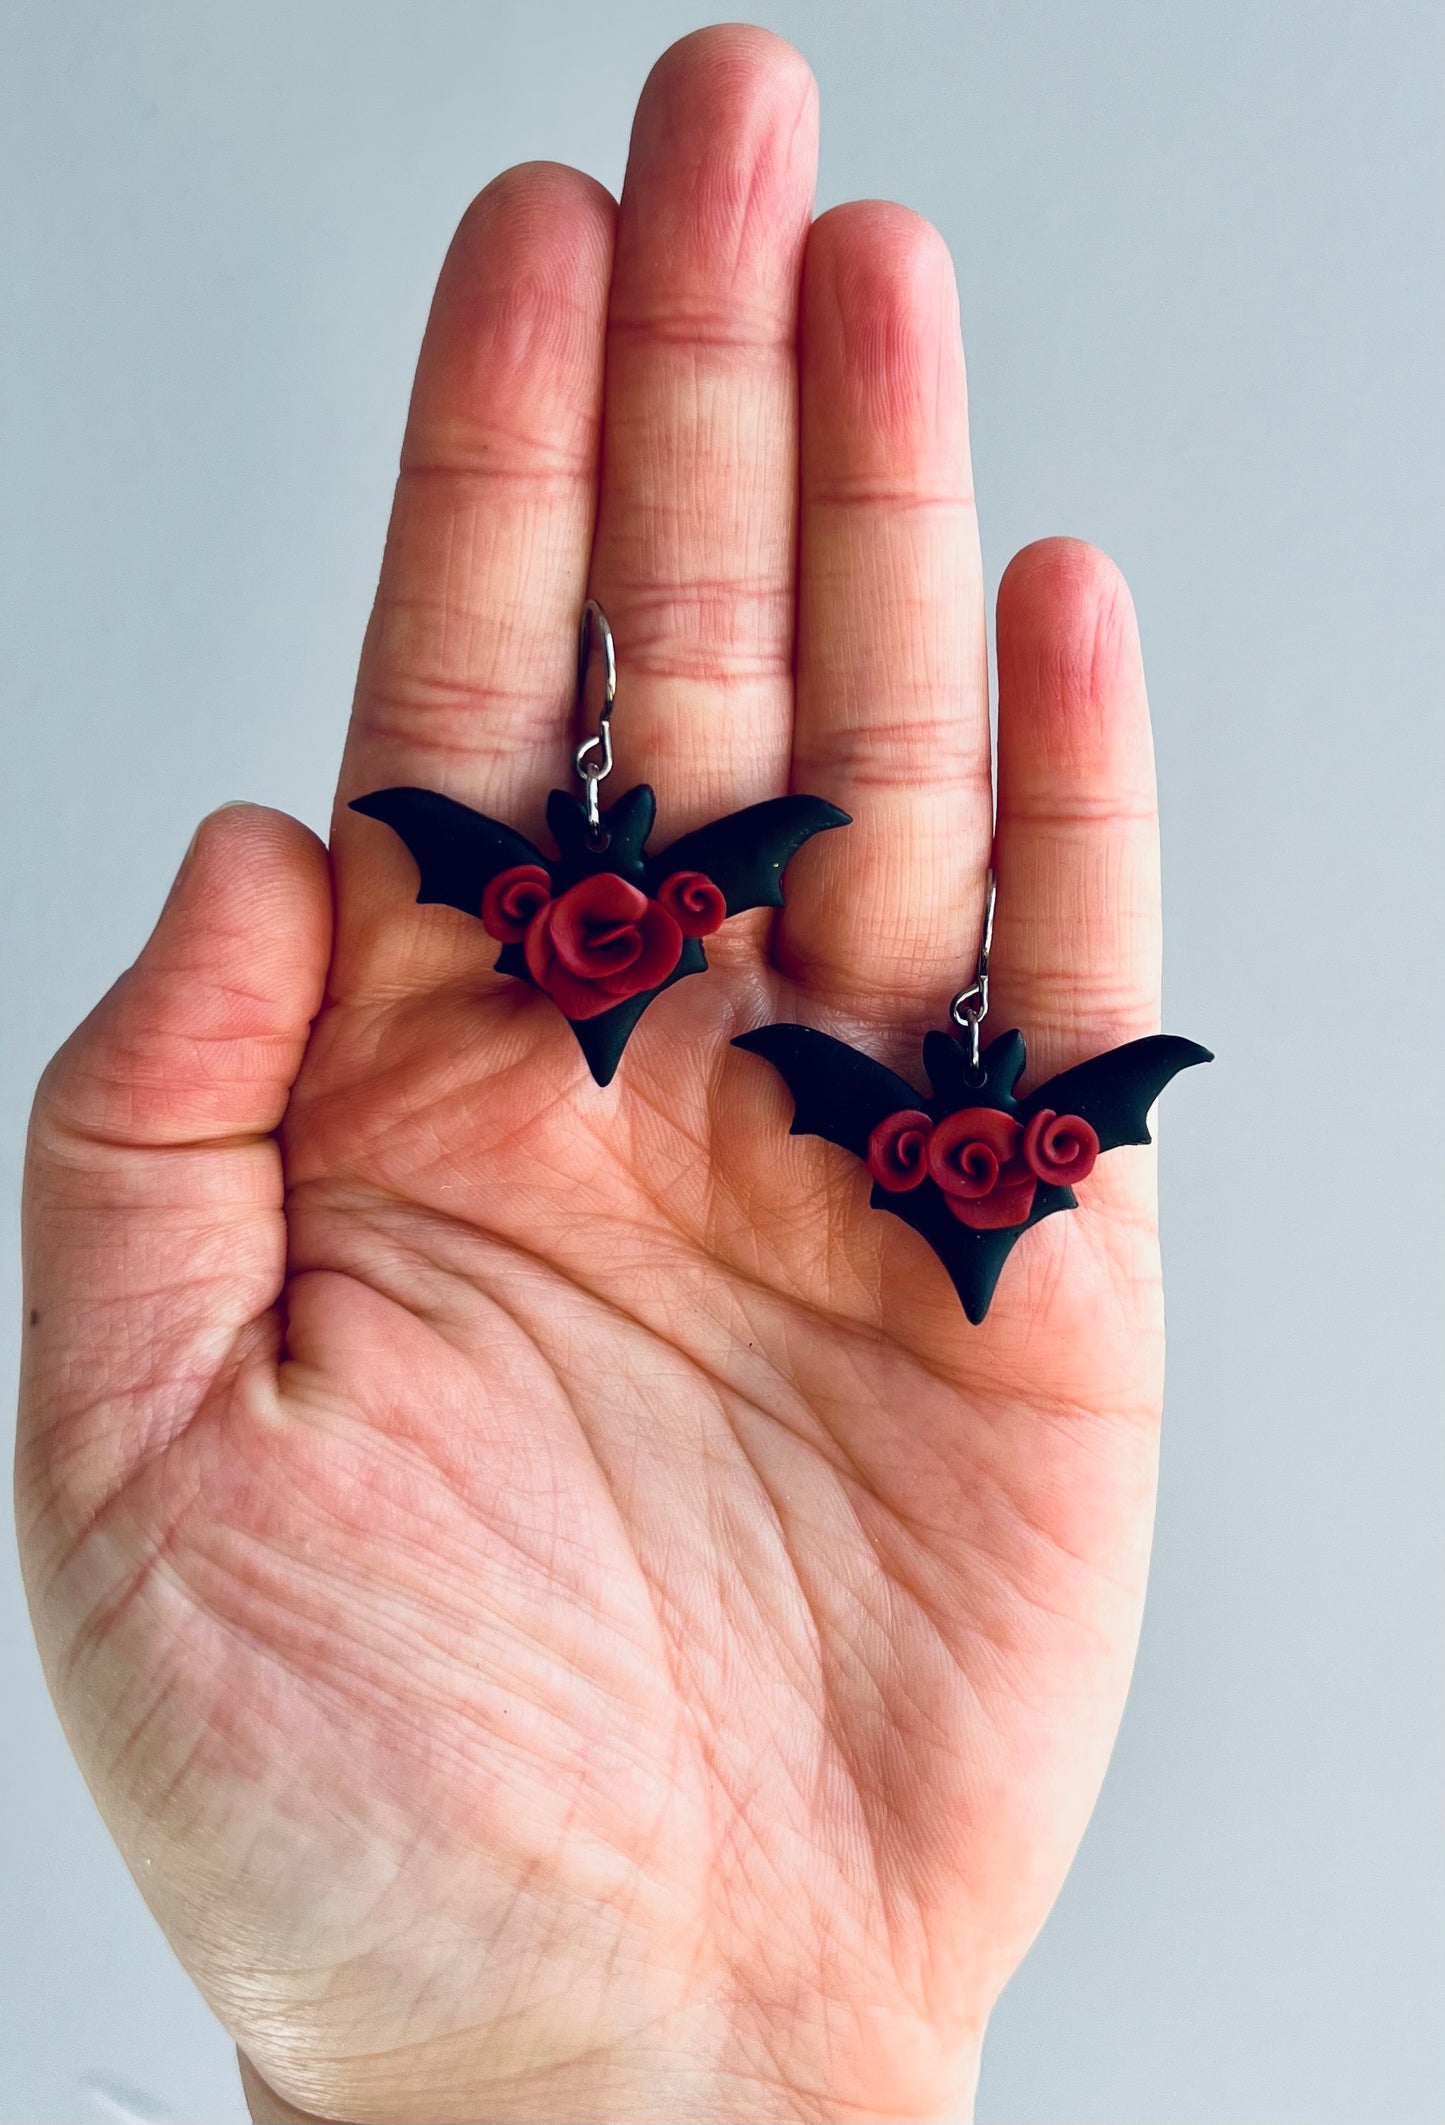 Captivating black bat earrings adorned with striking red roses, evoking an aura of dark romance and gothic elegance.